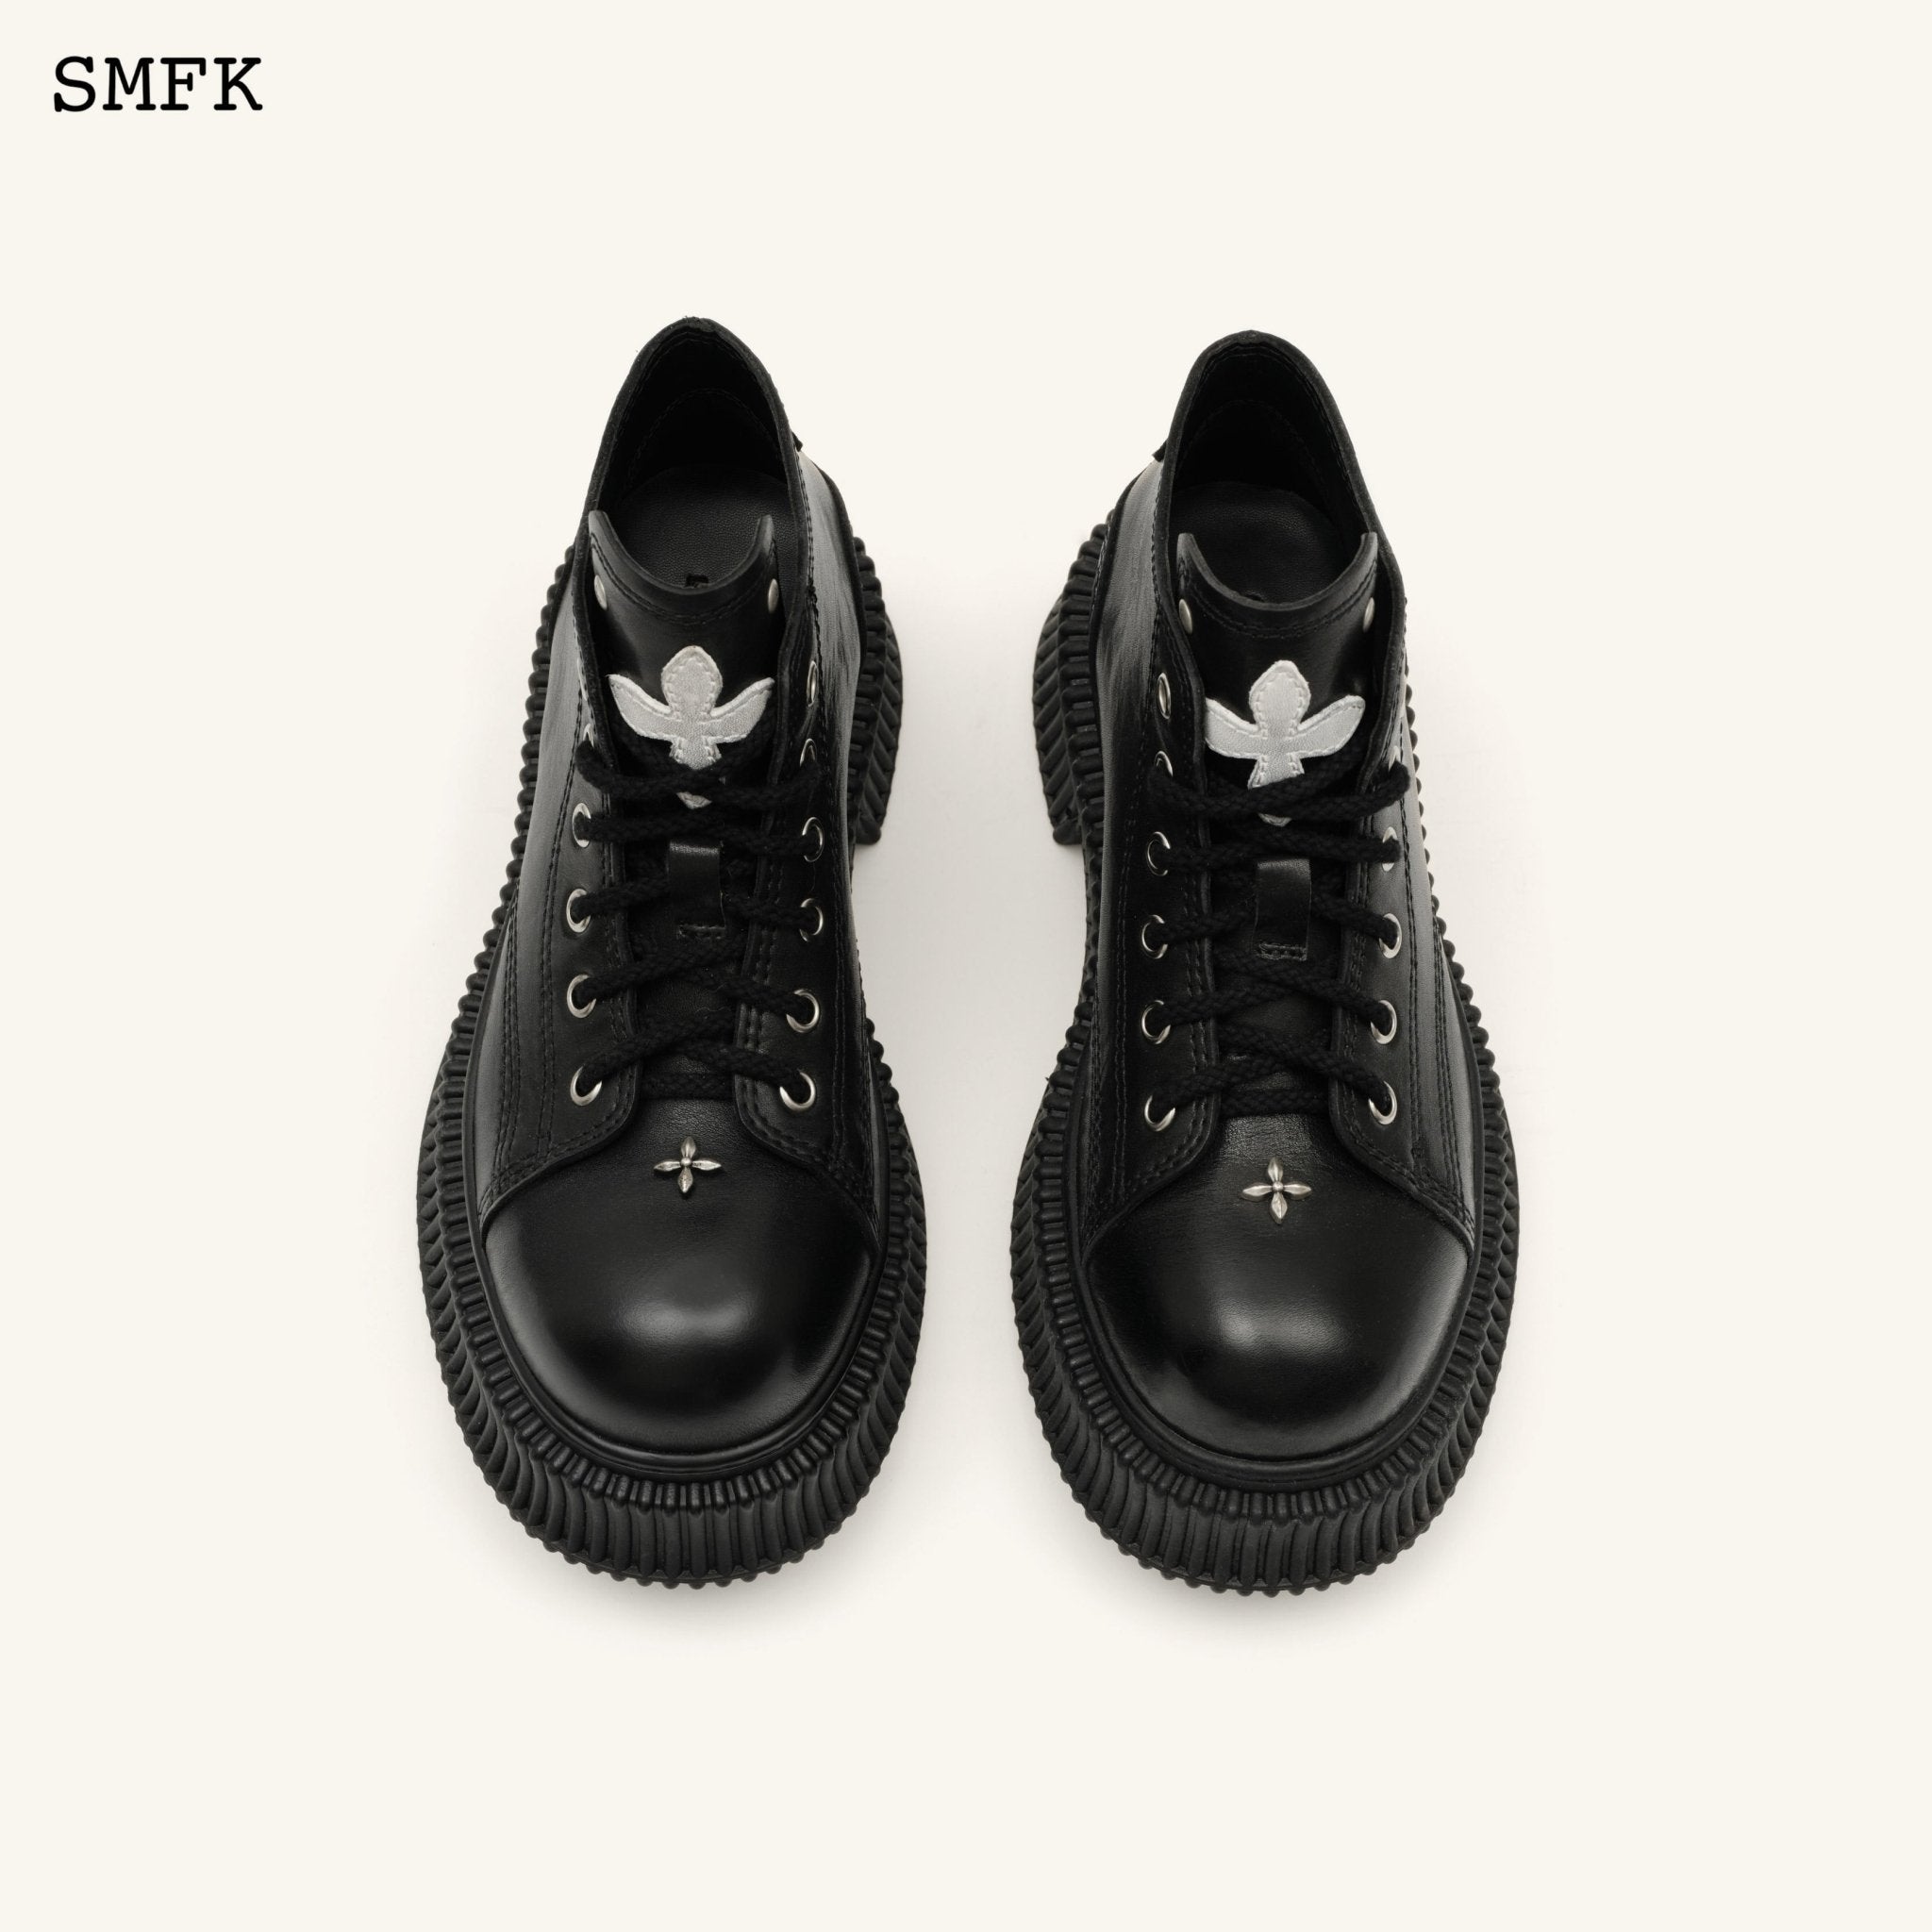 SMFK Compass Cross Low-Top Black Desert Boots | MADA IN CHINA